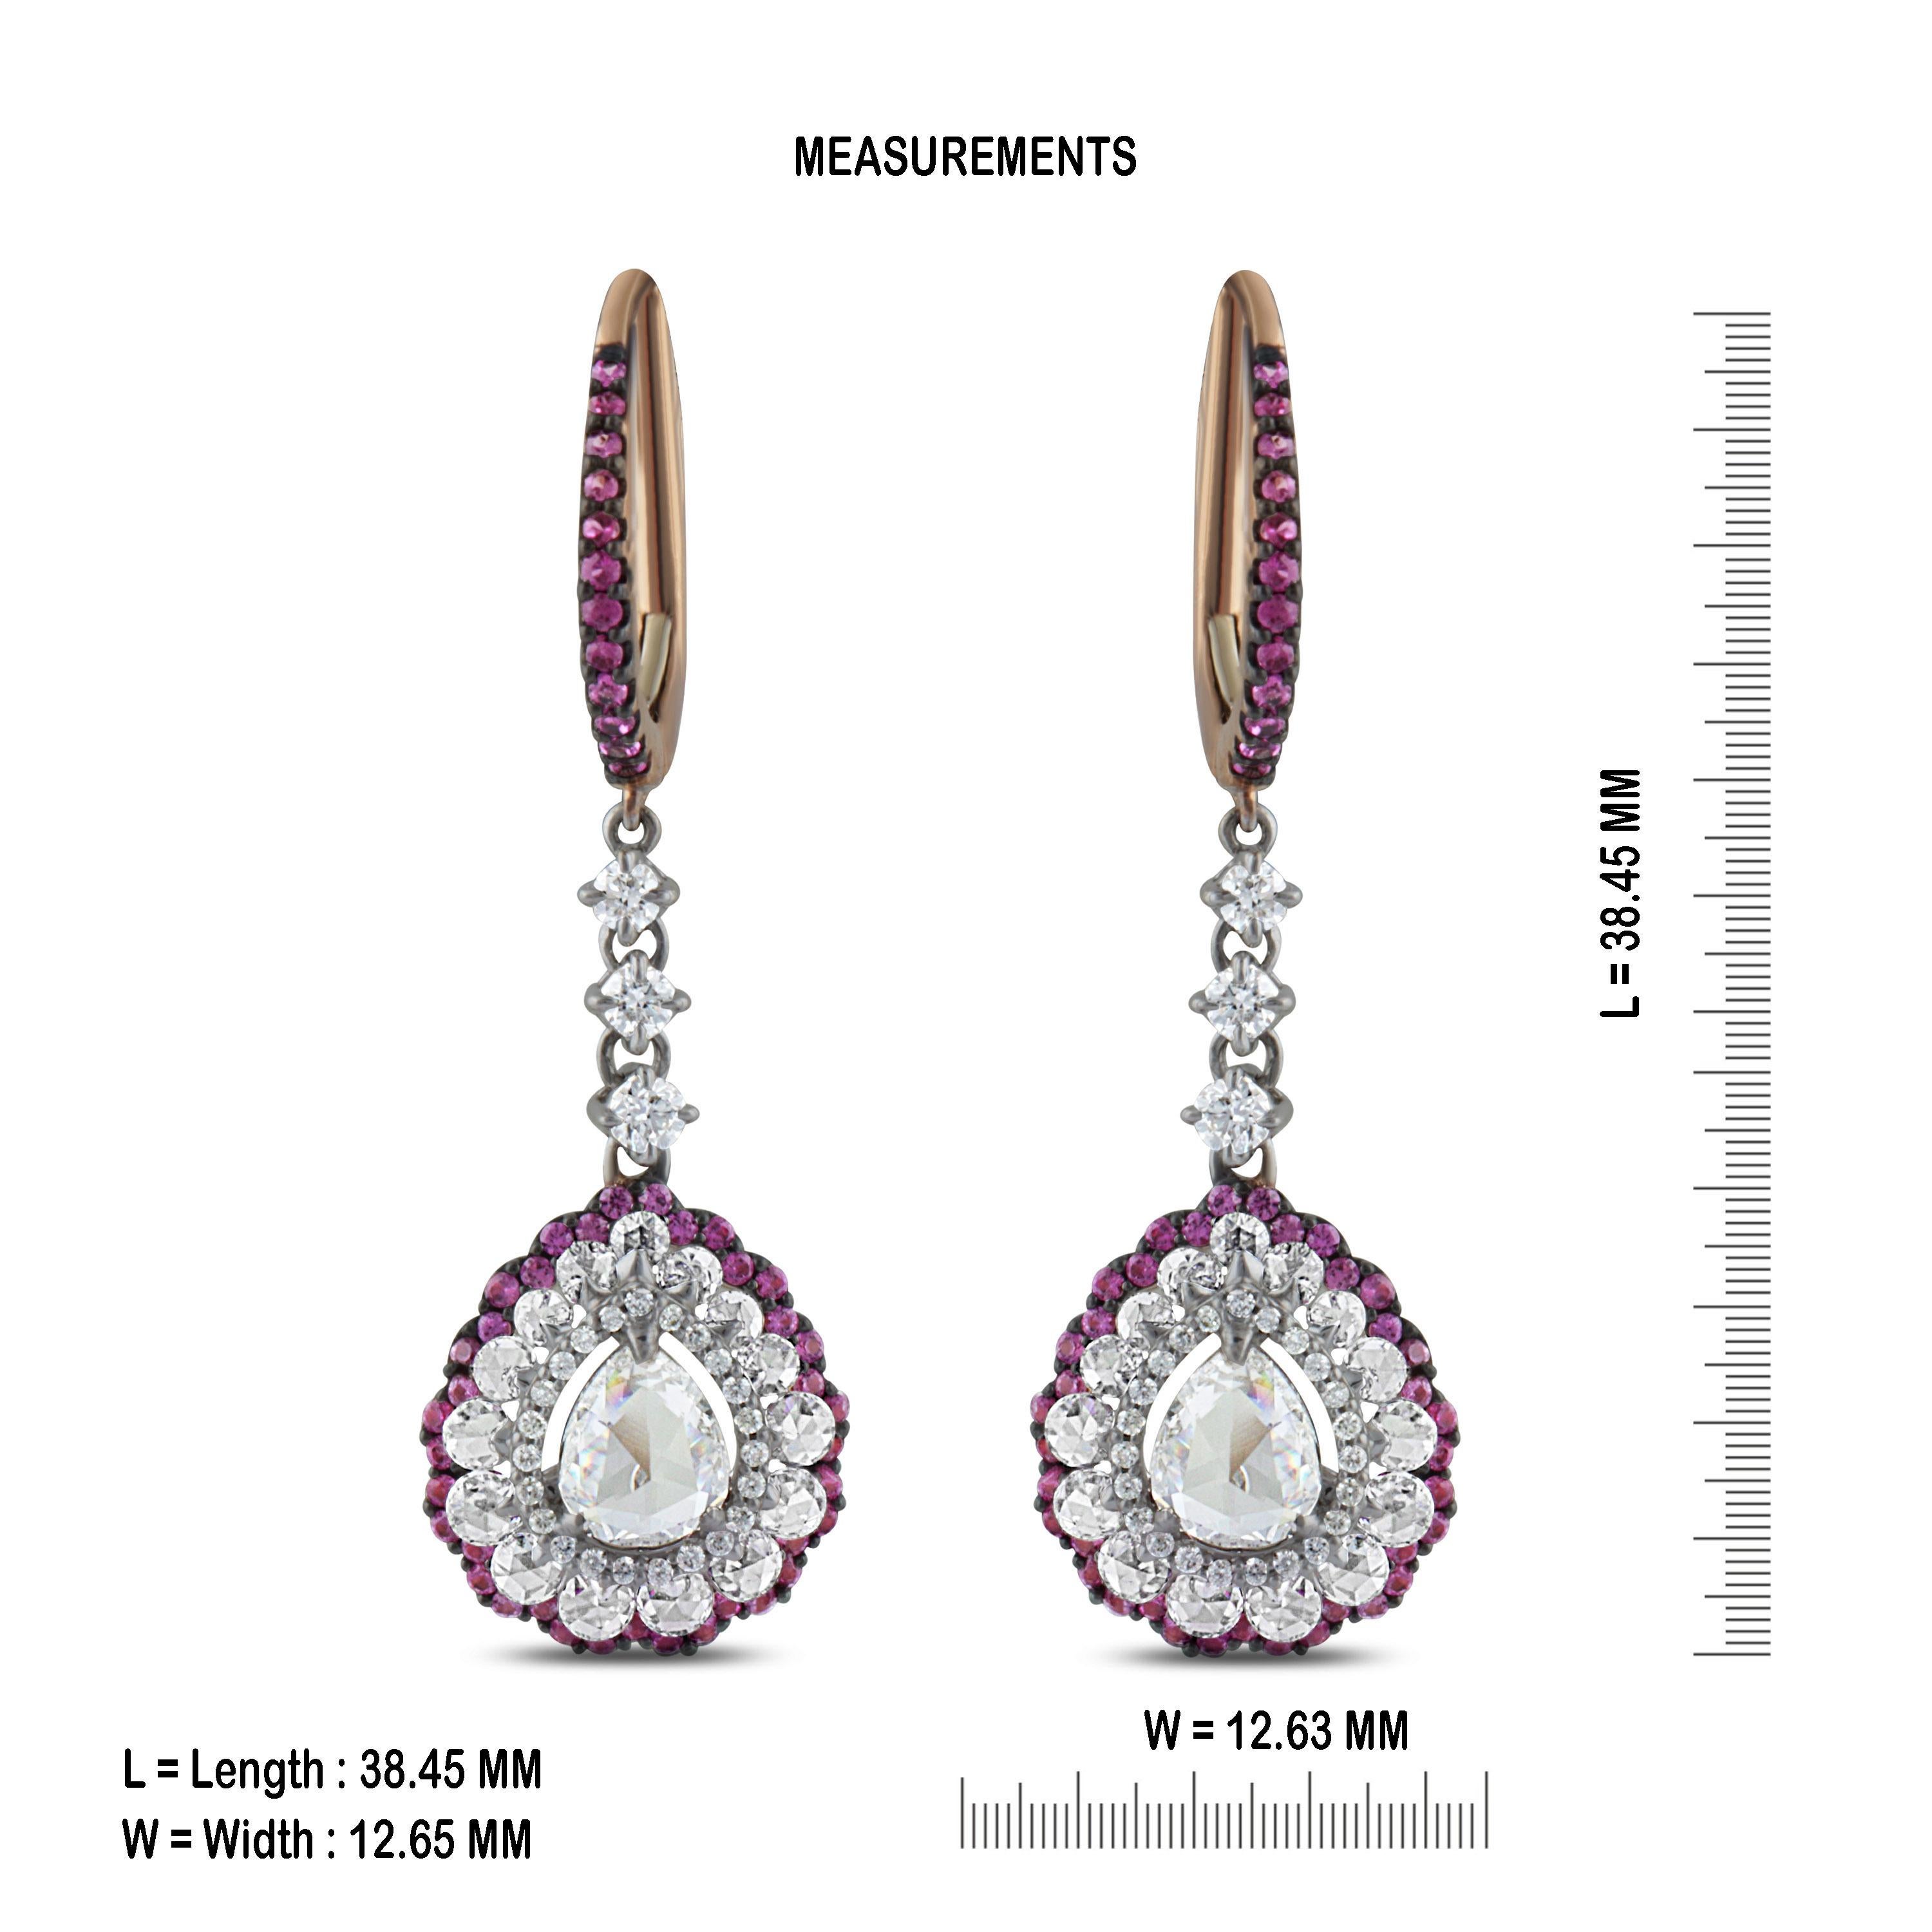 Studio Rêves Diamonds and Pink Sapphires Dangling Earrings in 18 Karat Gold In New Condition For Sale In Mumbai, Maharashtra